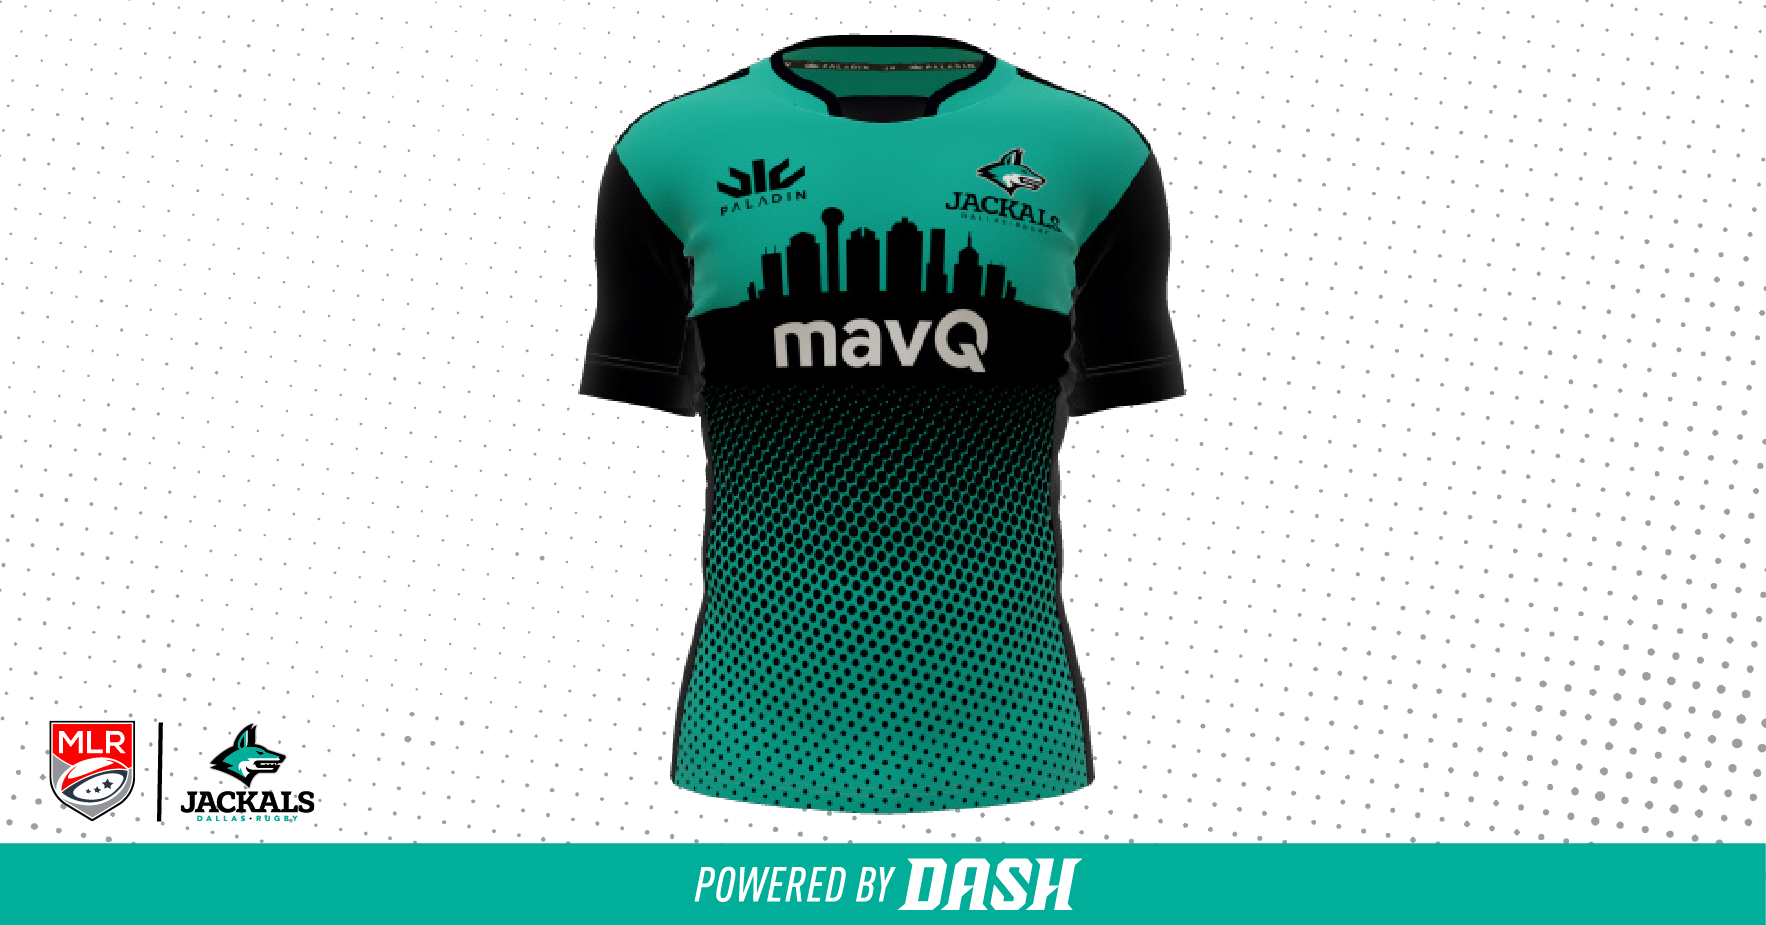 City Jersey Auction – Signed Game Worn Jersey